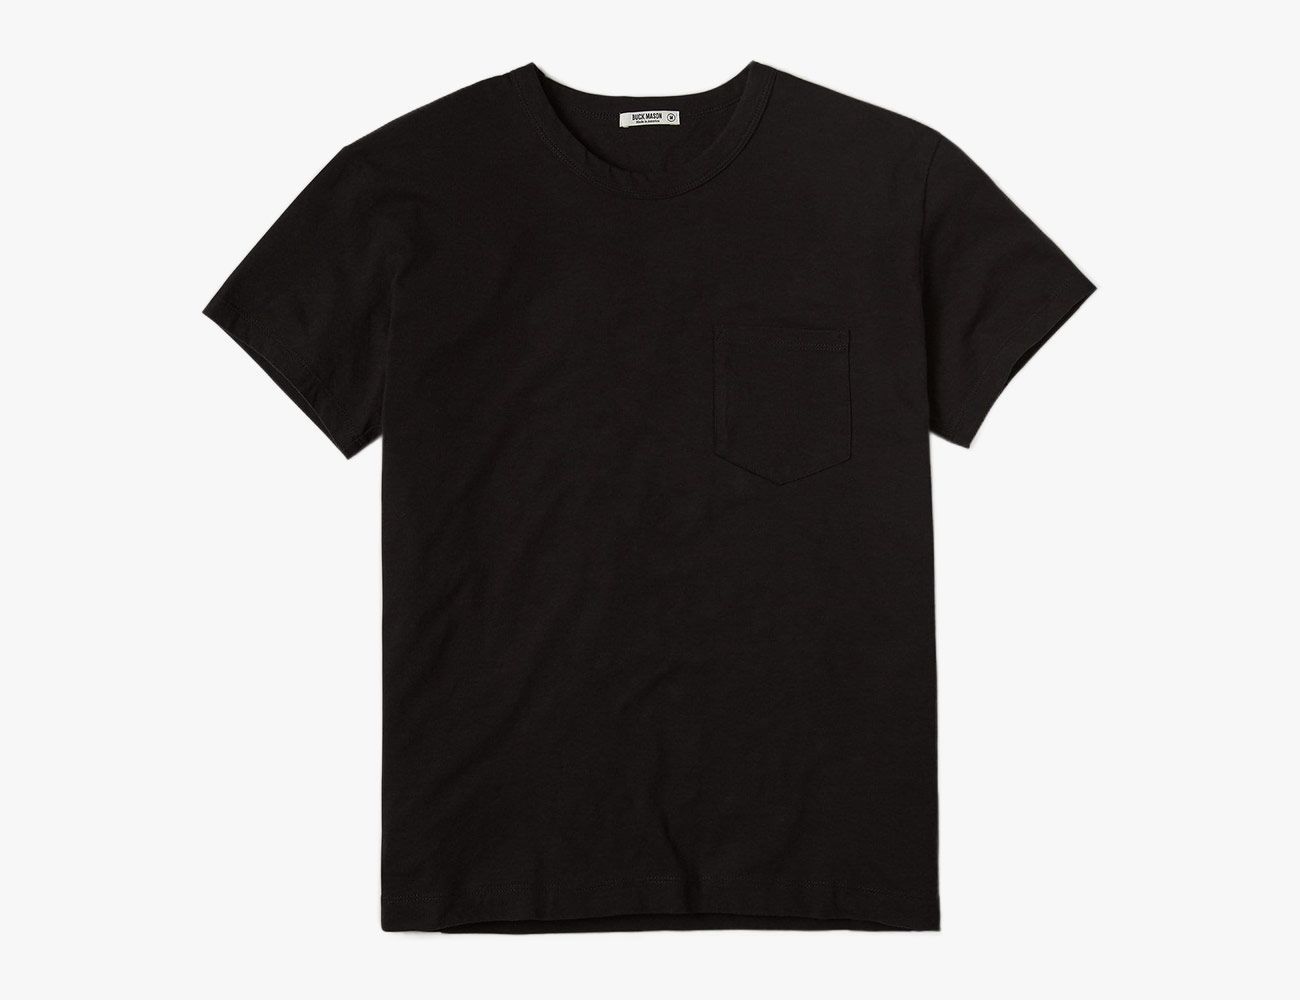 Invitere anspore effekt The Best Basic T-Shirts for Every Man's Closet